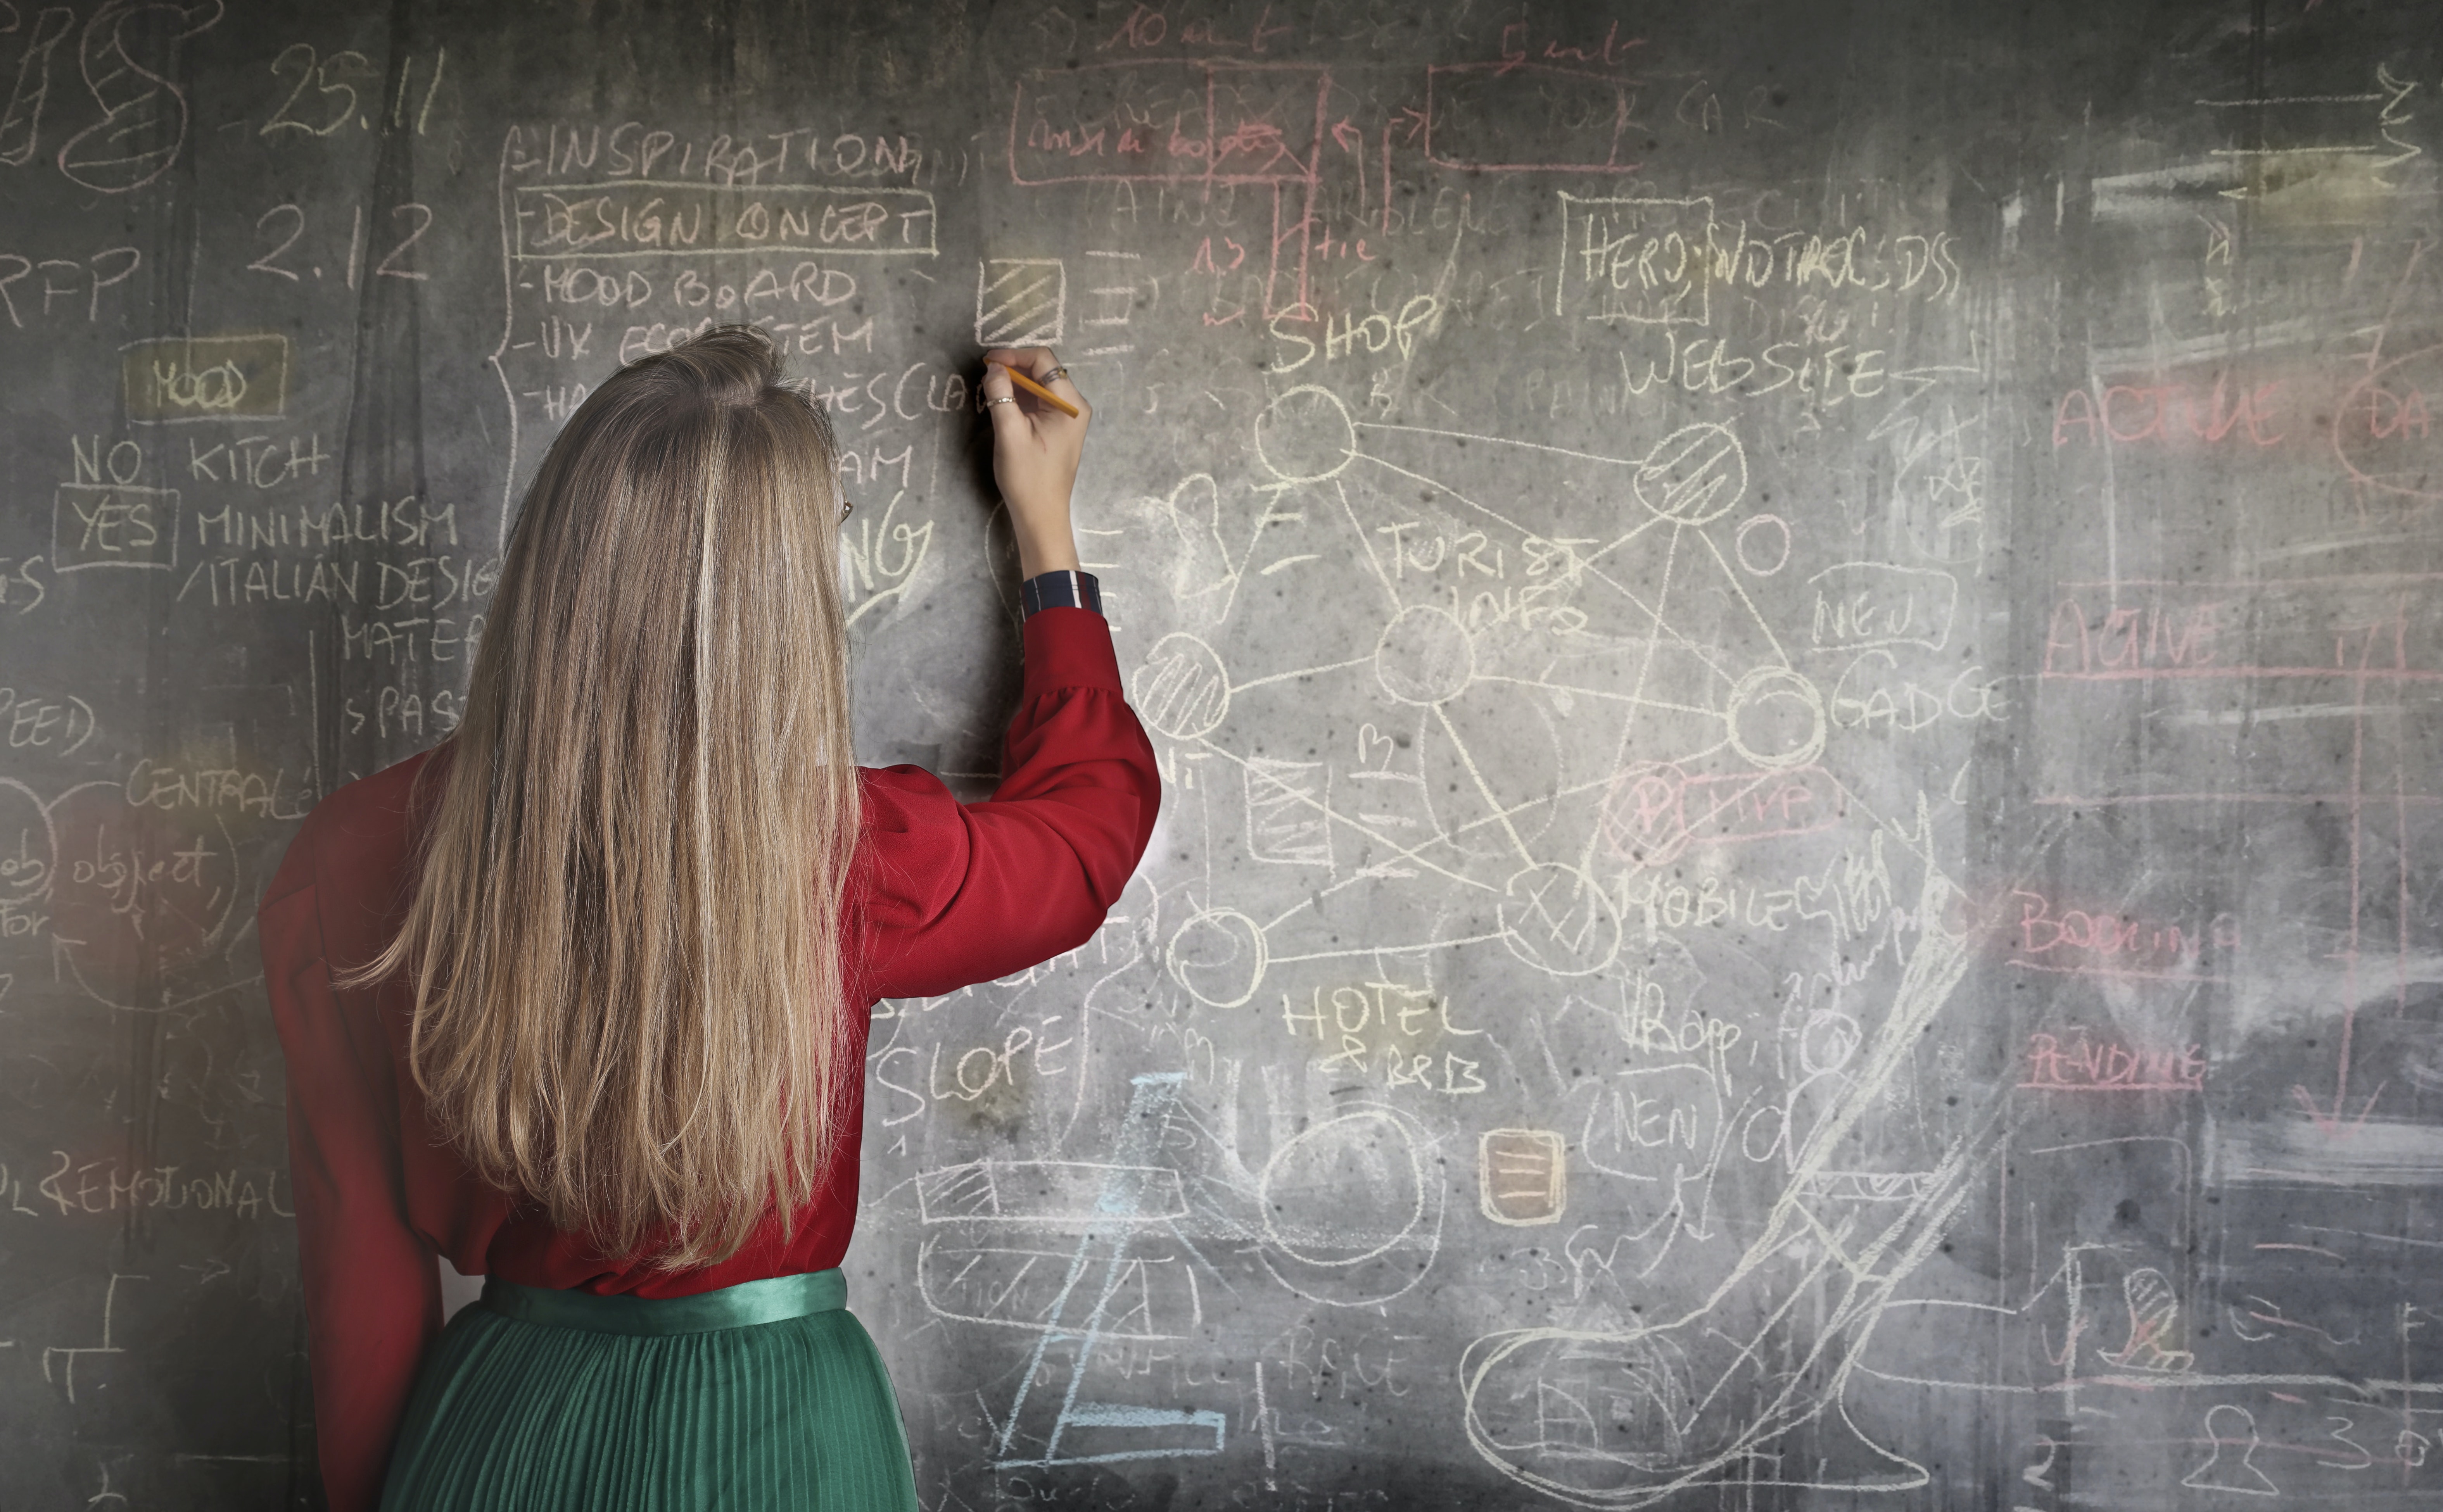 A girl writing on the black board